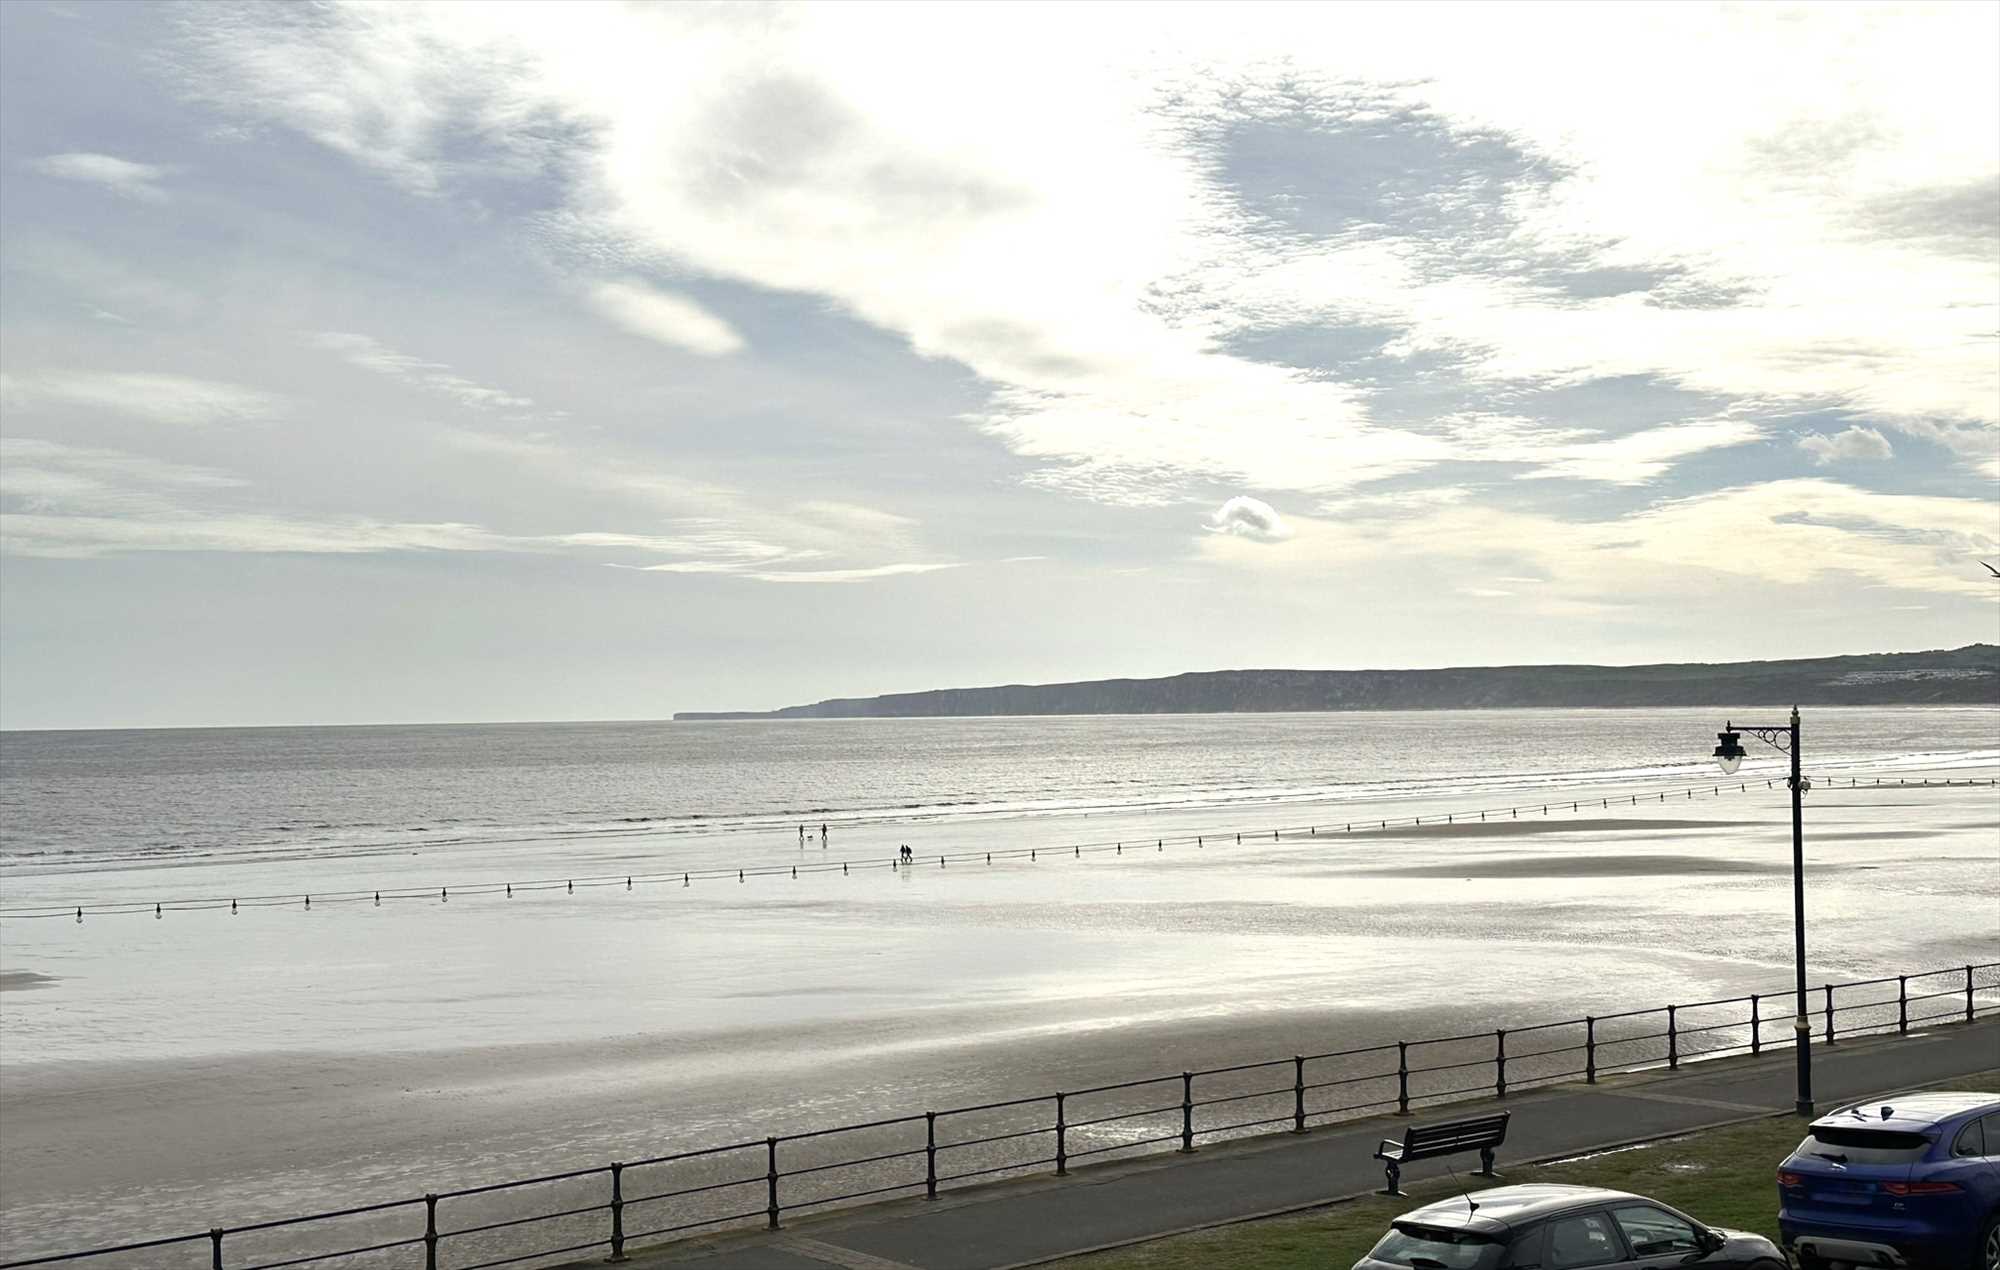 The Landings, The Beach, Filey - Picture 8